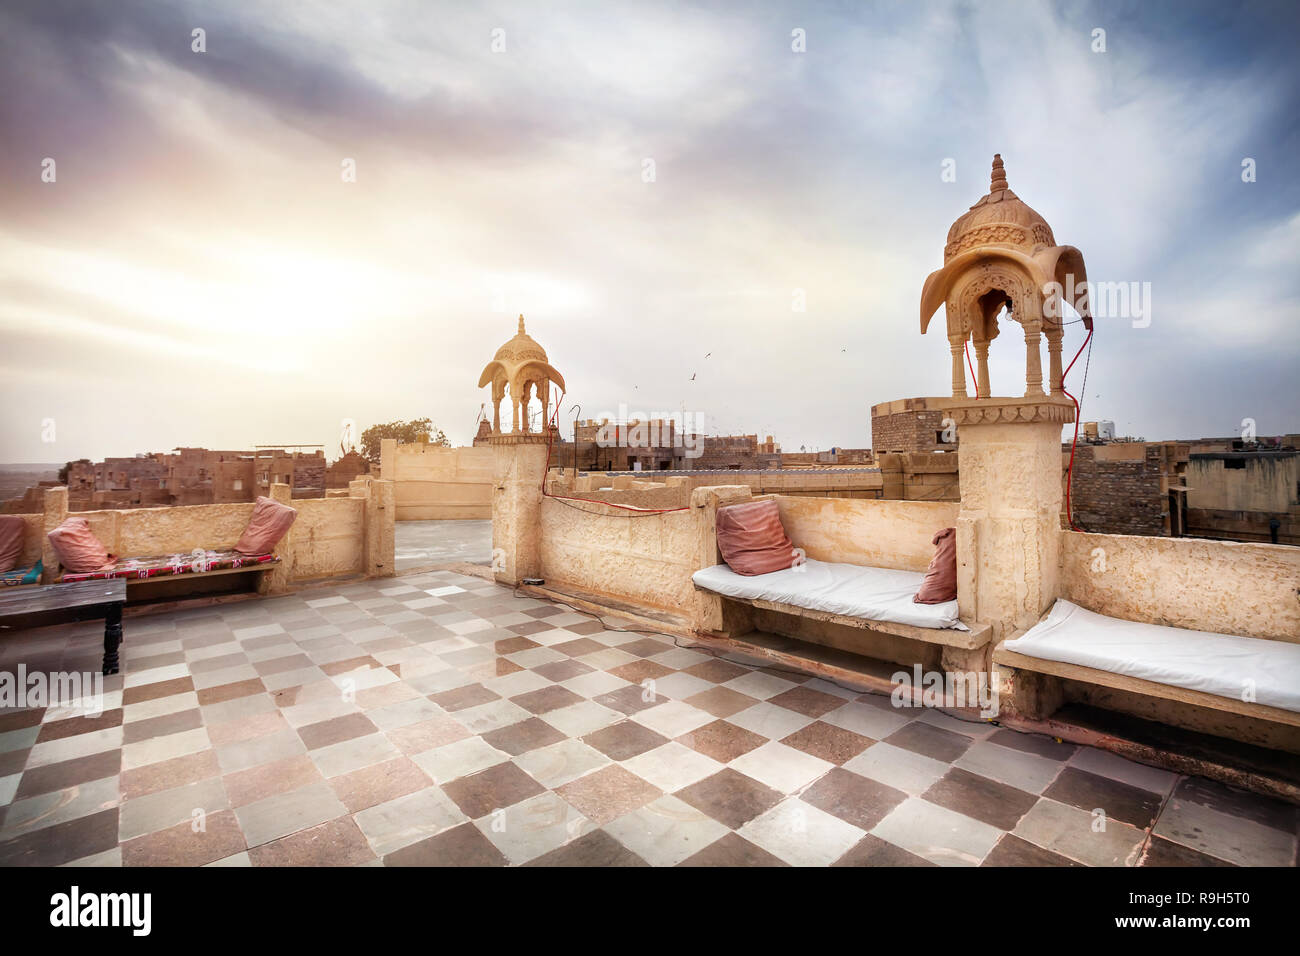 Rooftop restaurant in the hotel of Jaisalmer fort, Rajasthan, India Stock Photo